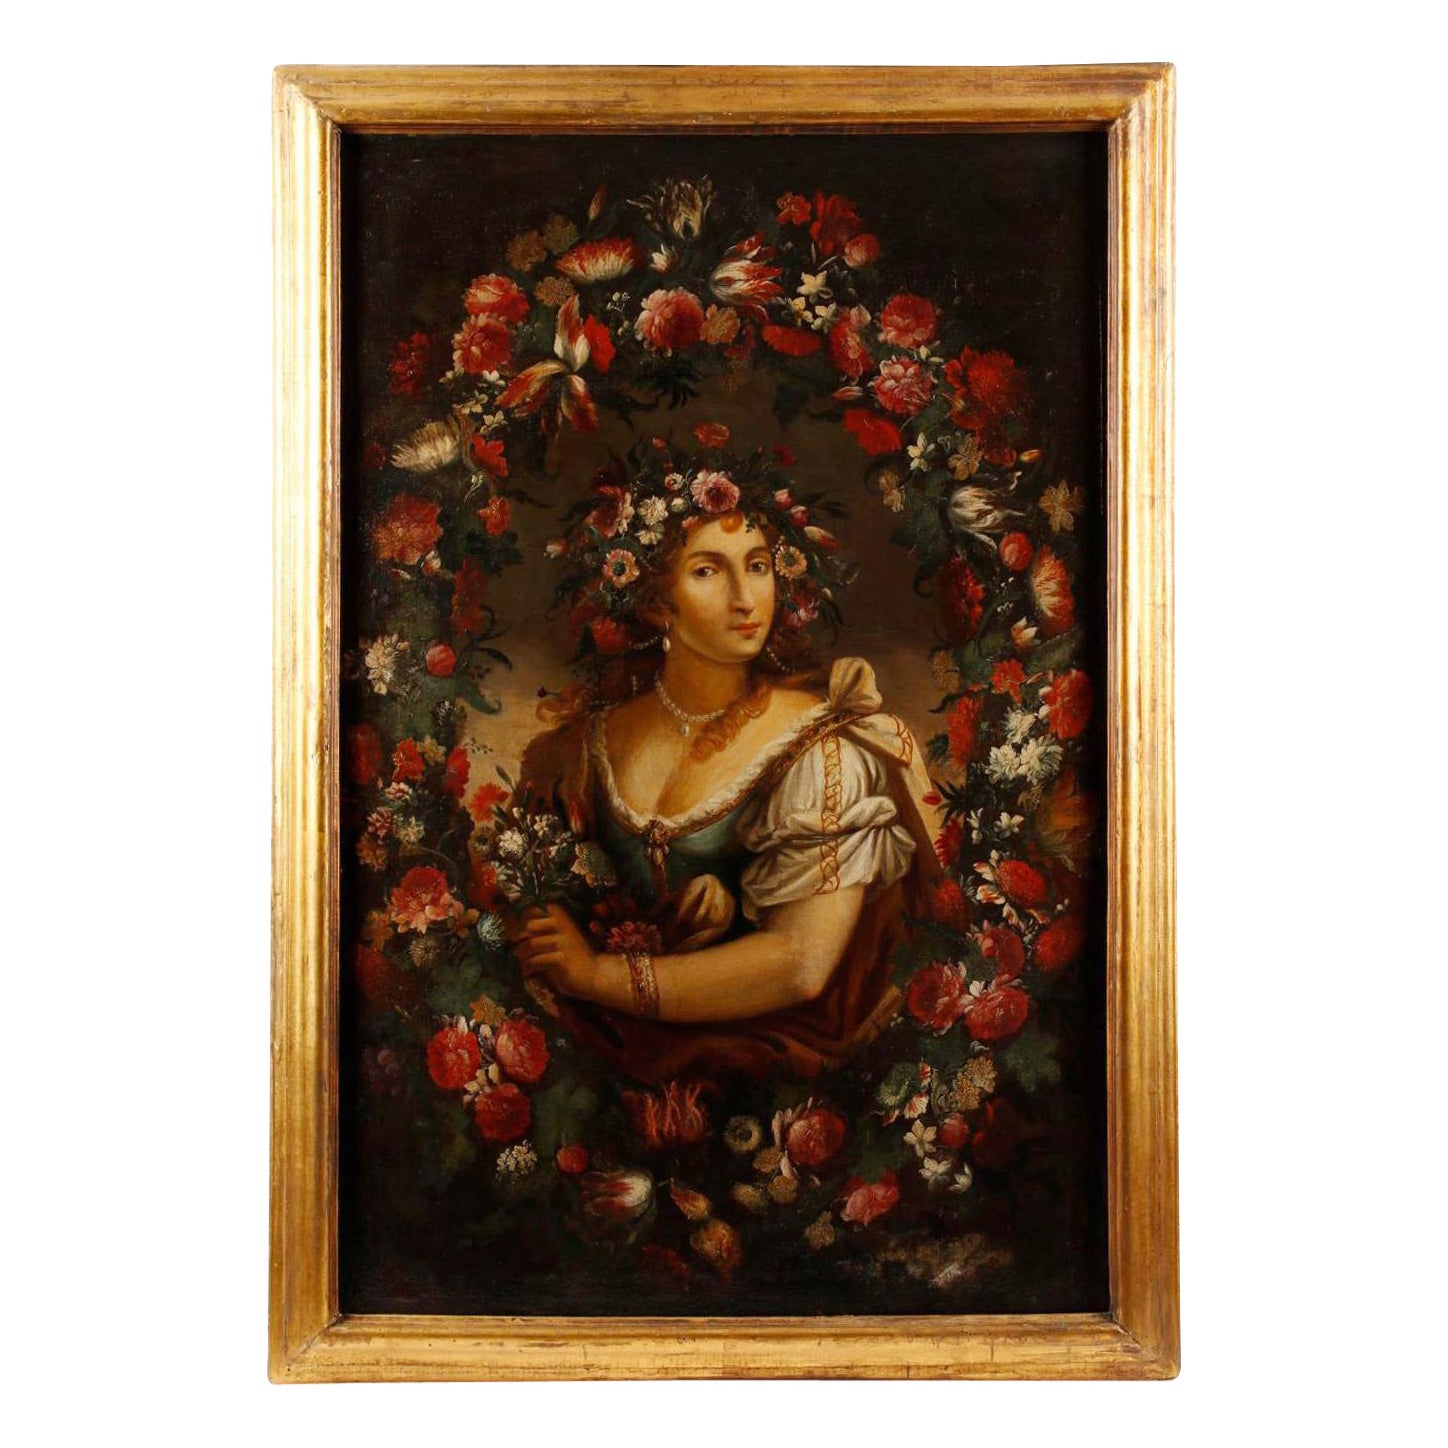 Spanish Oil on Canvas Painting Portrait of a Lady with Flowers, 19th Century